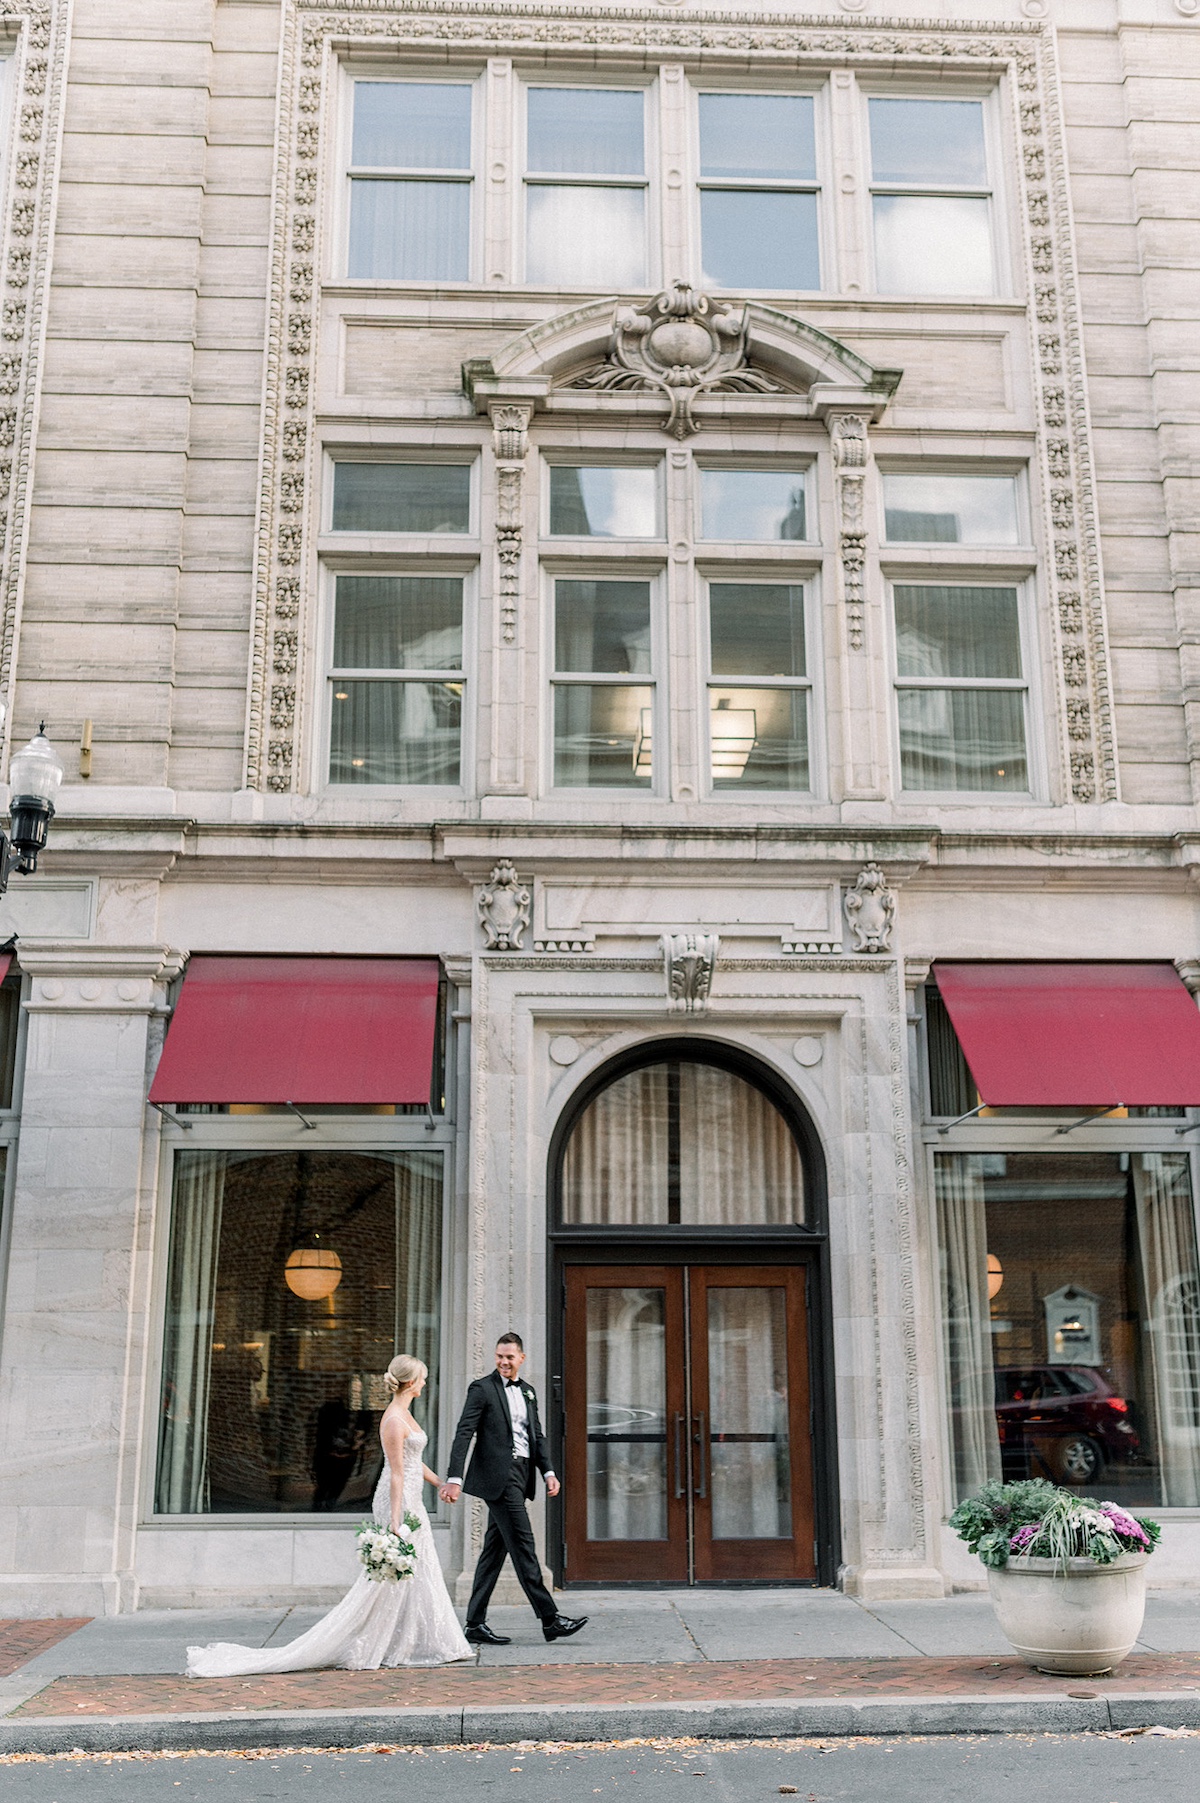 Affectionate and classic, the bride and groom's portrait against Lancaster City's architectural beauty is a testament to their high-end love story.